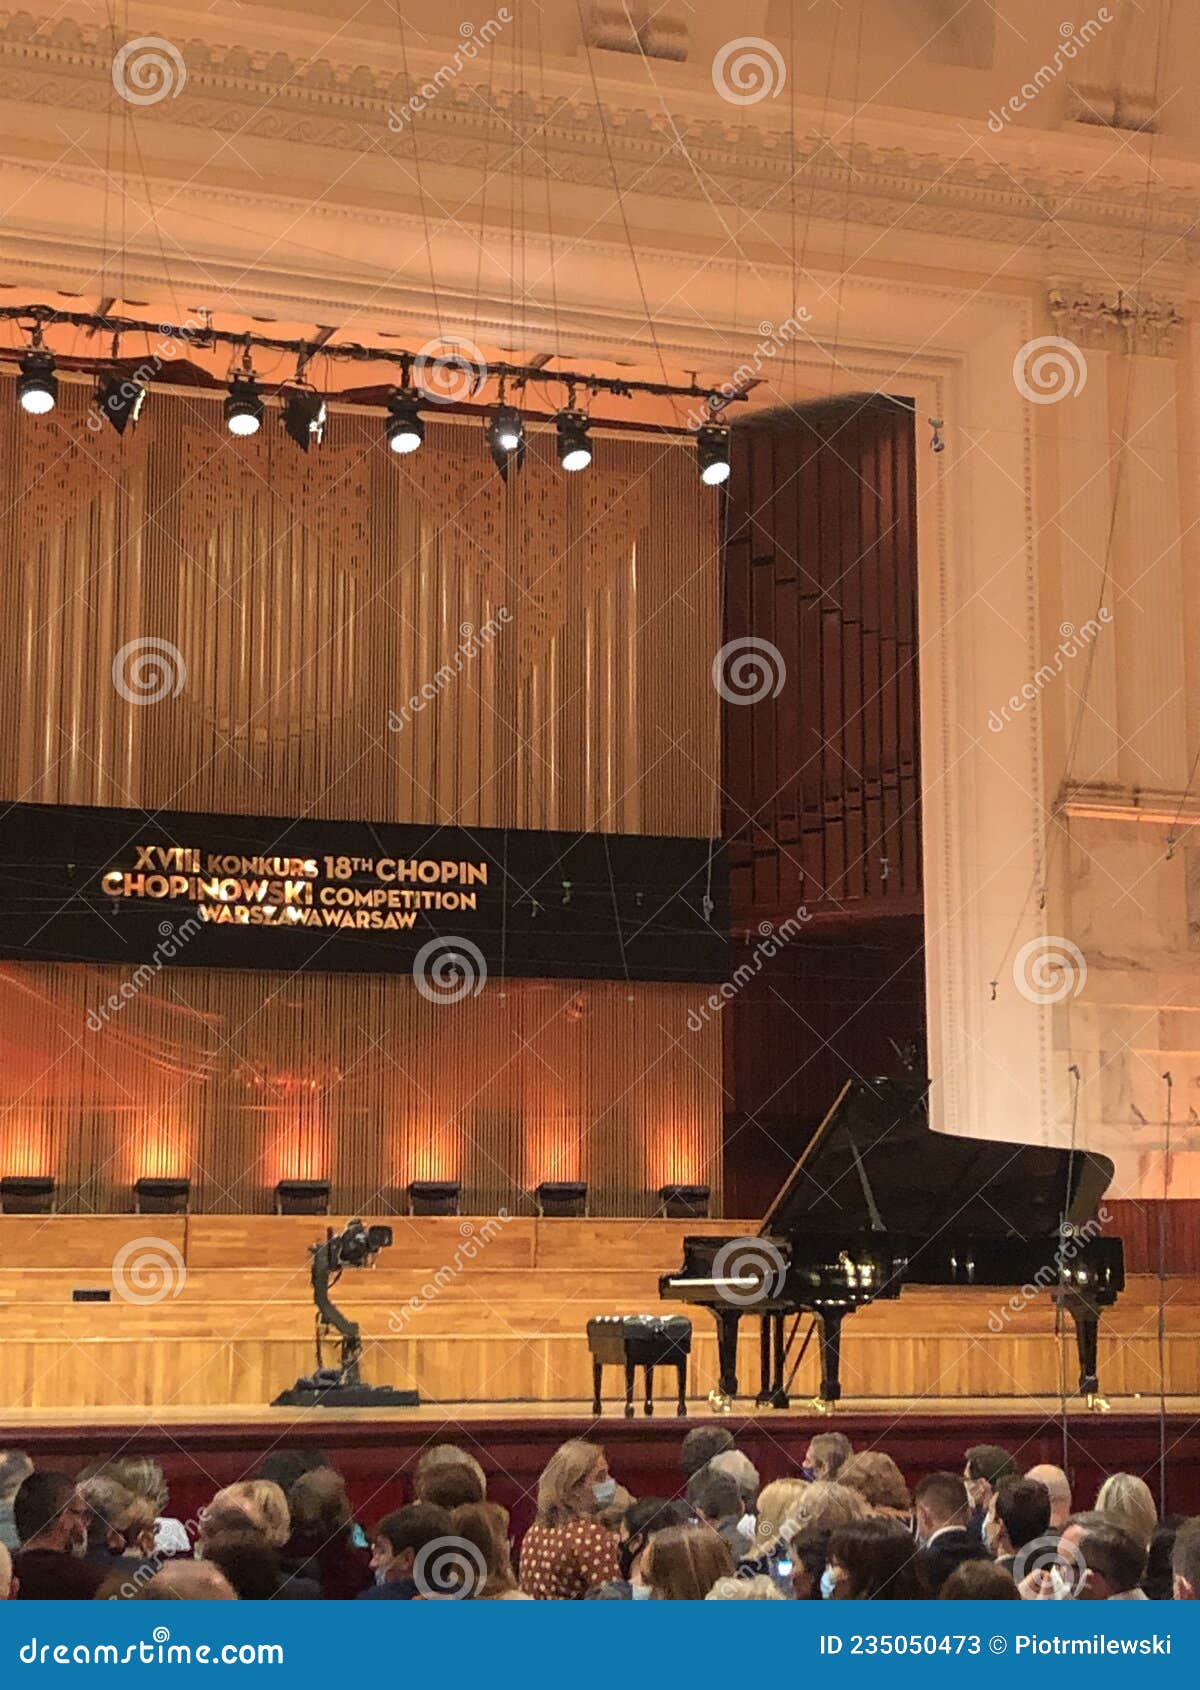 Warsaw/Mazowieckie/Poland - October 16, 18th International Chopin Piano Competition Competition Editorial Stock Photo - Image acoustic, decor: 235050473